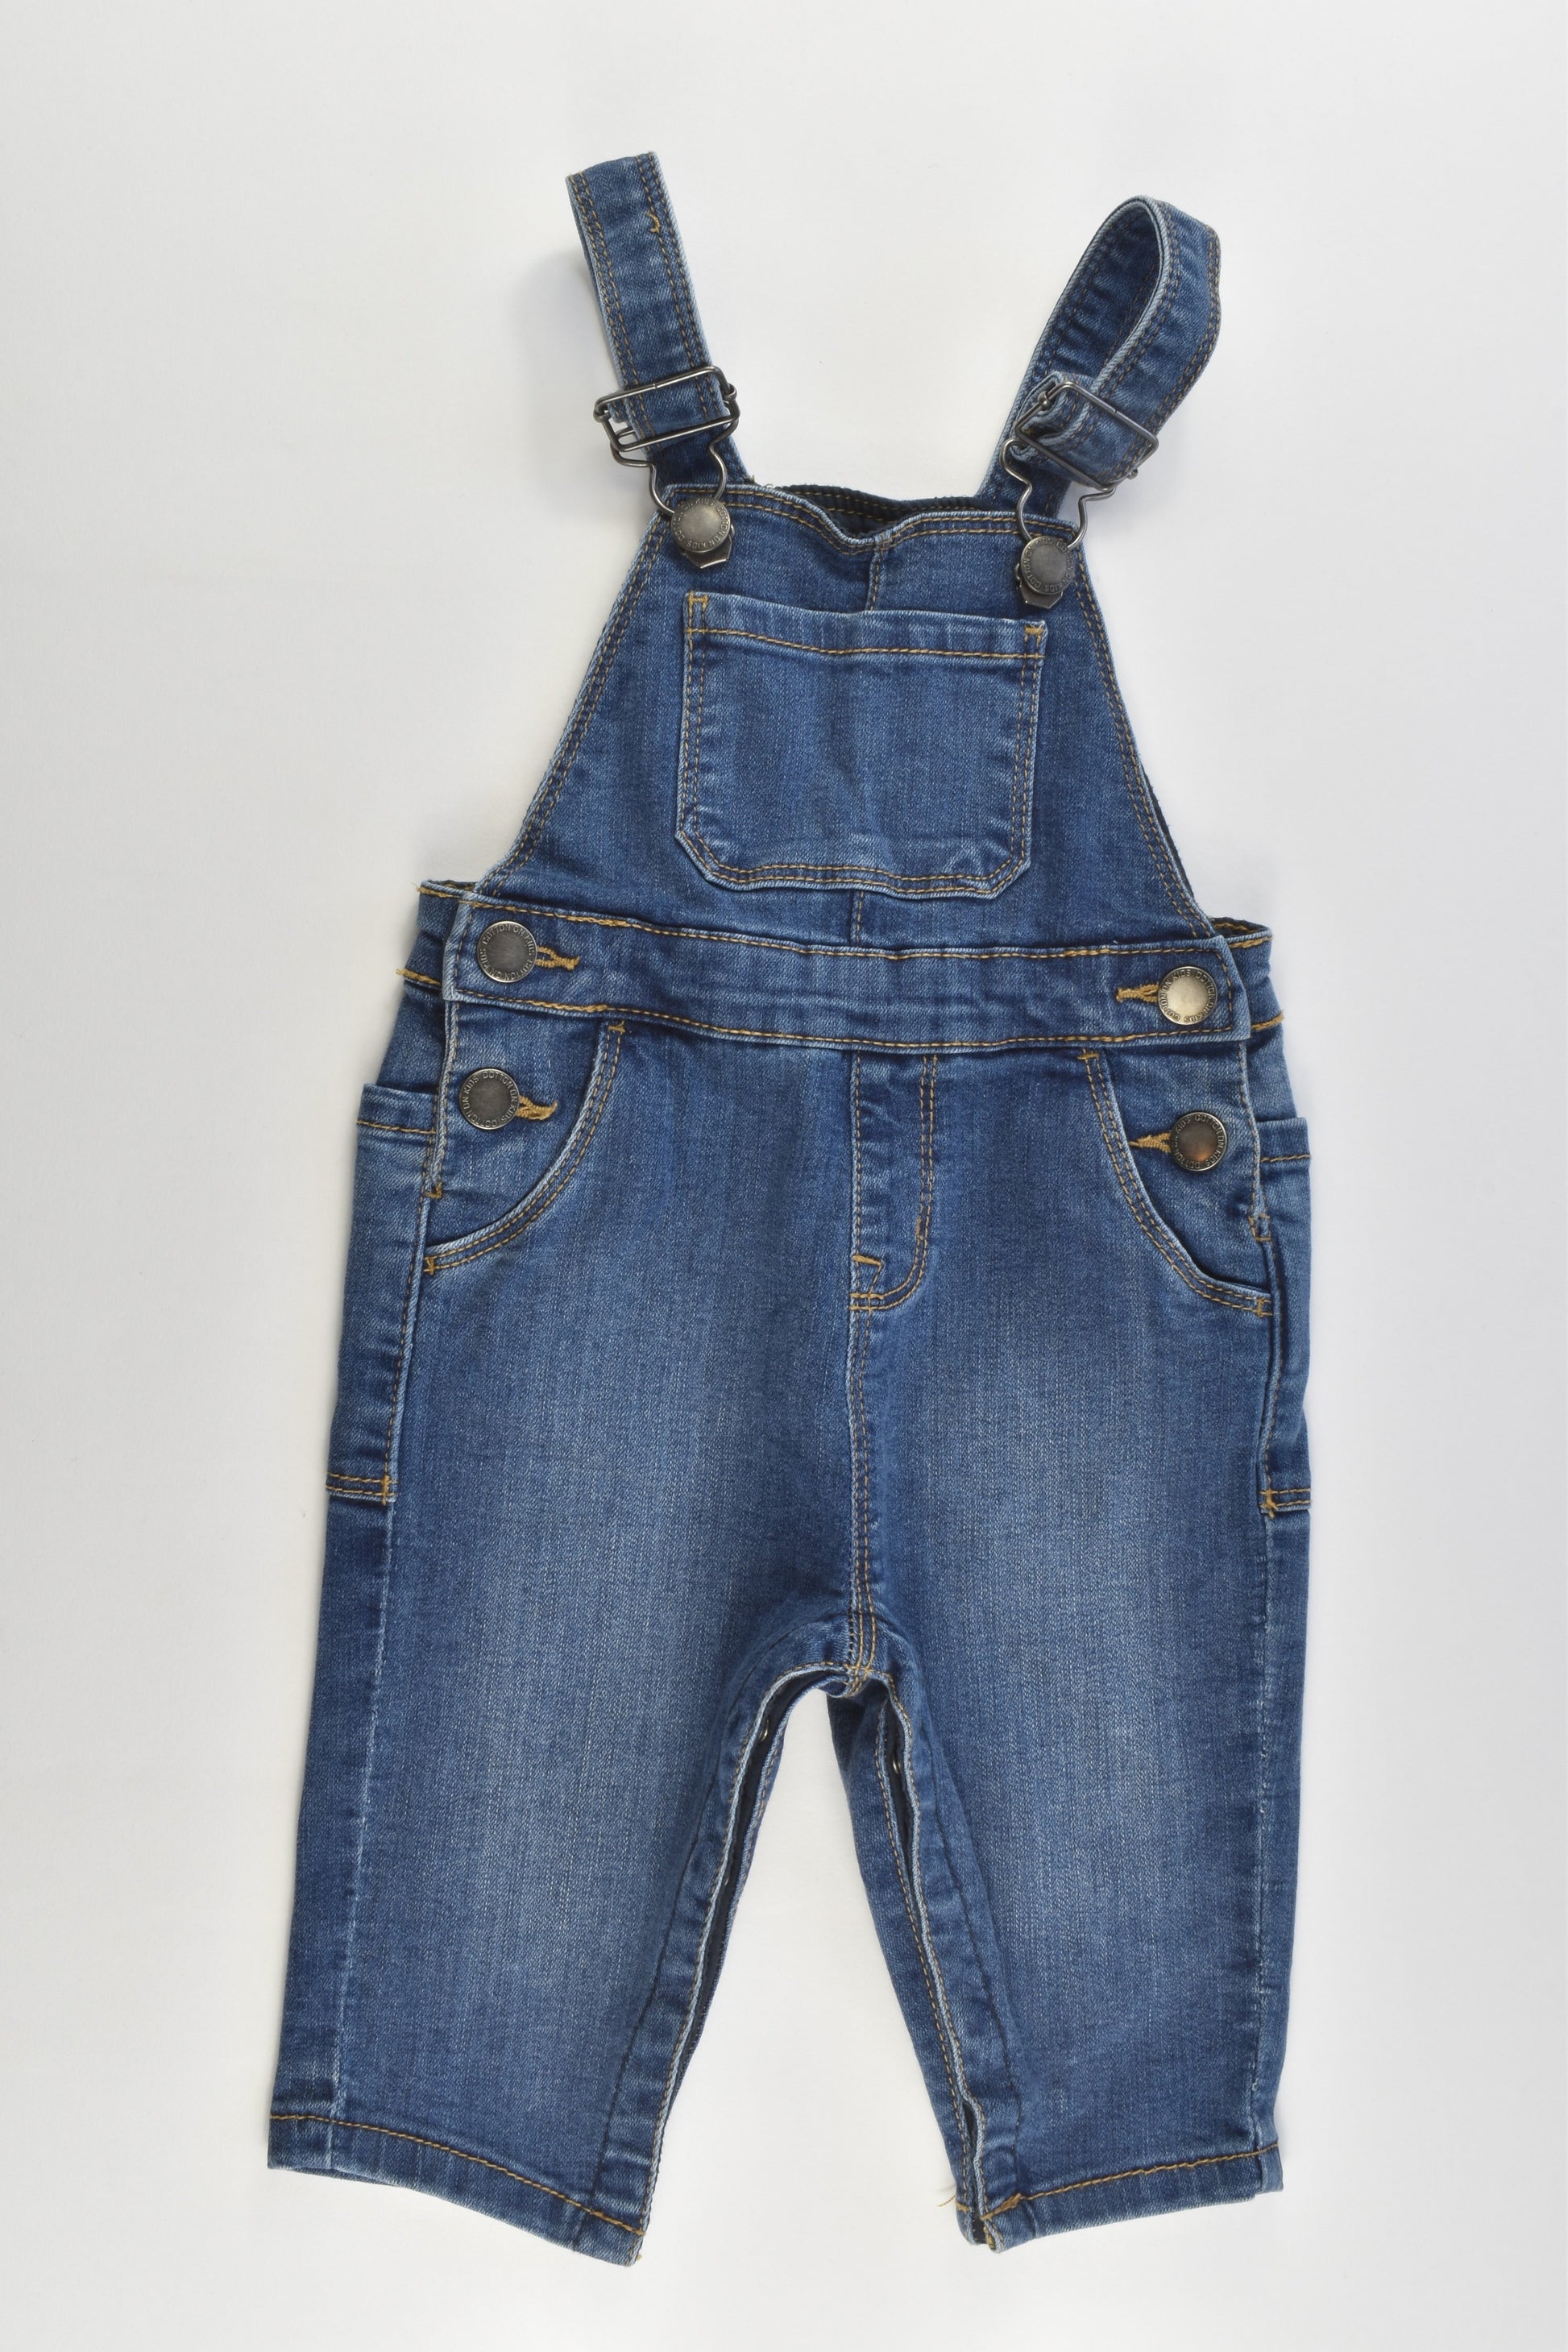 Cotton On Baby Size 0 (6-12 months) Very Stretchy Denim Overalls